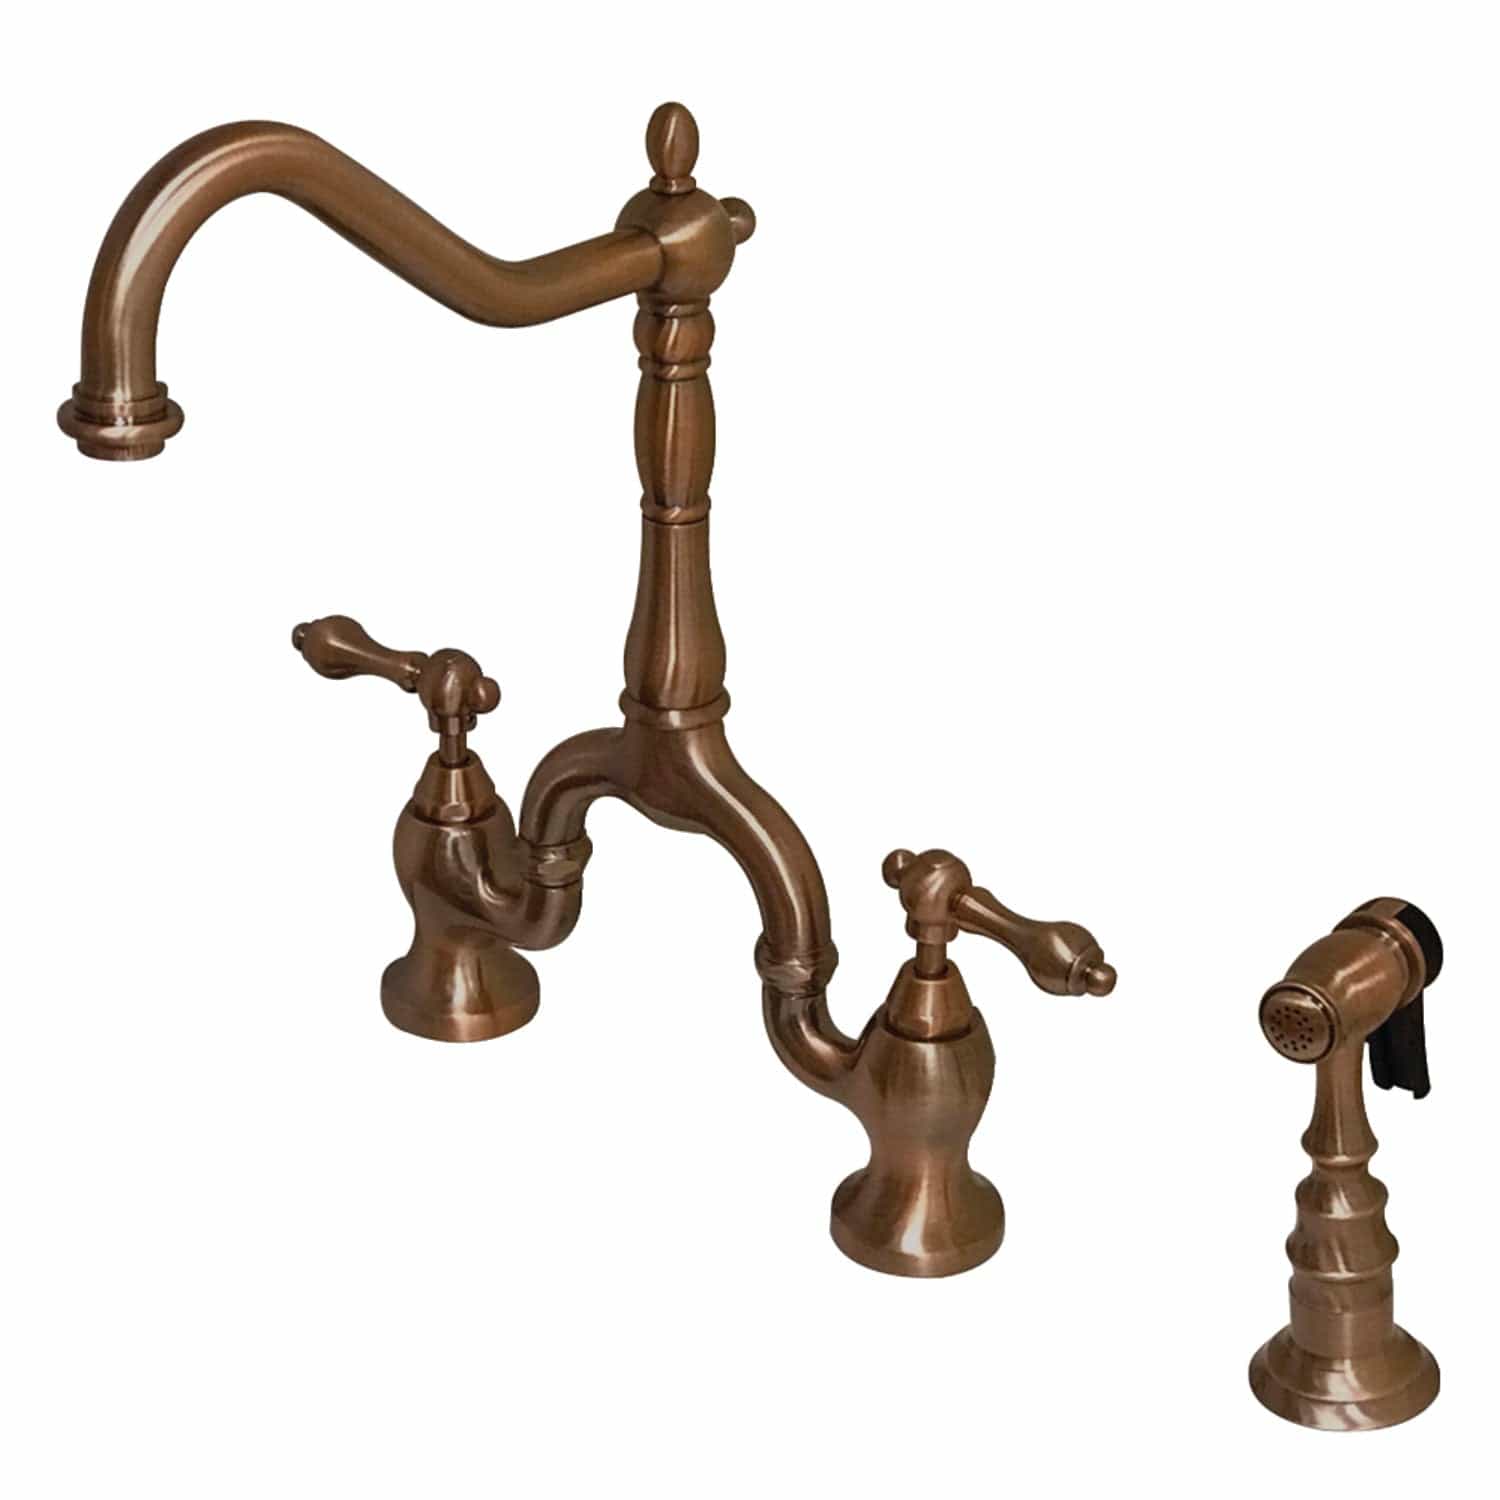 KINGSTON Brass English Country Kitchen Bridge Faucet with Brass Sprayer - Antique Copper